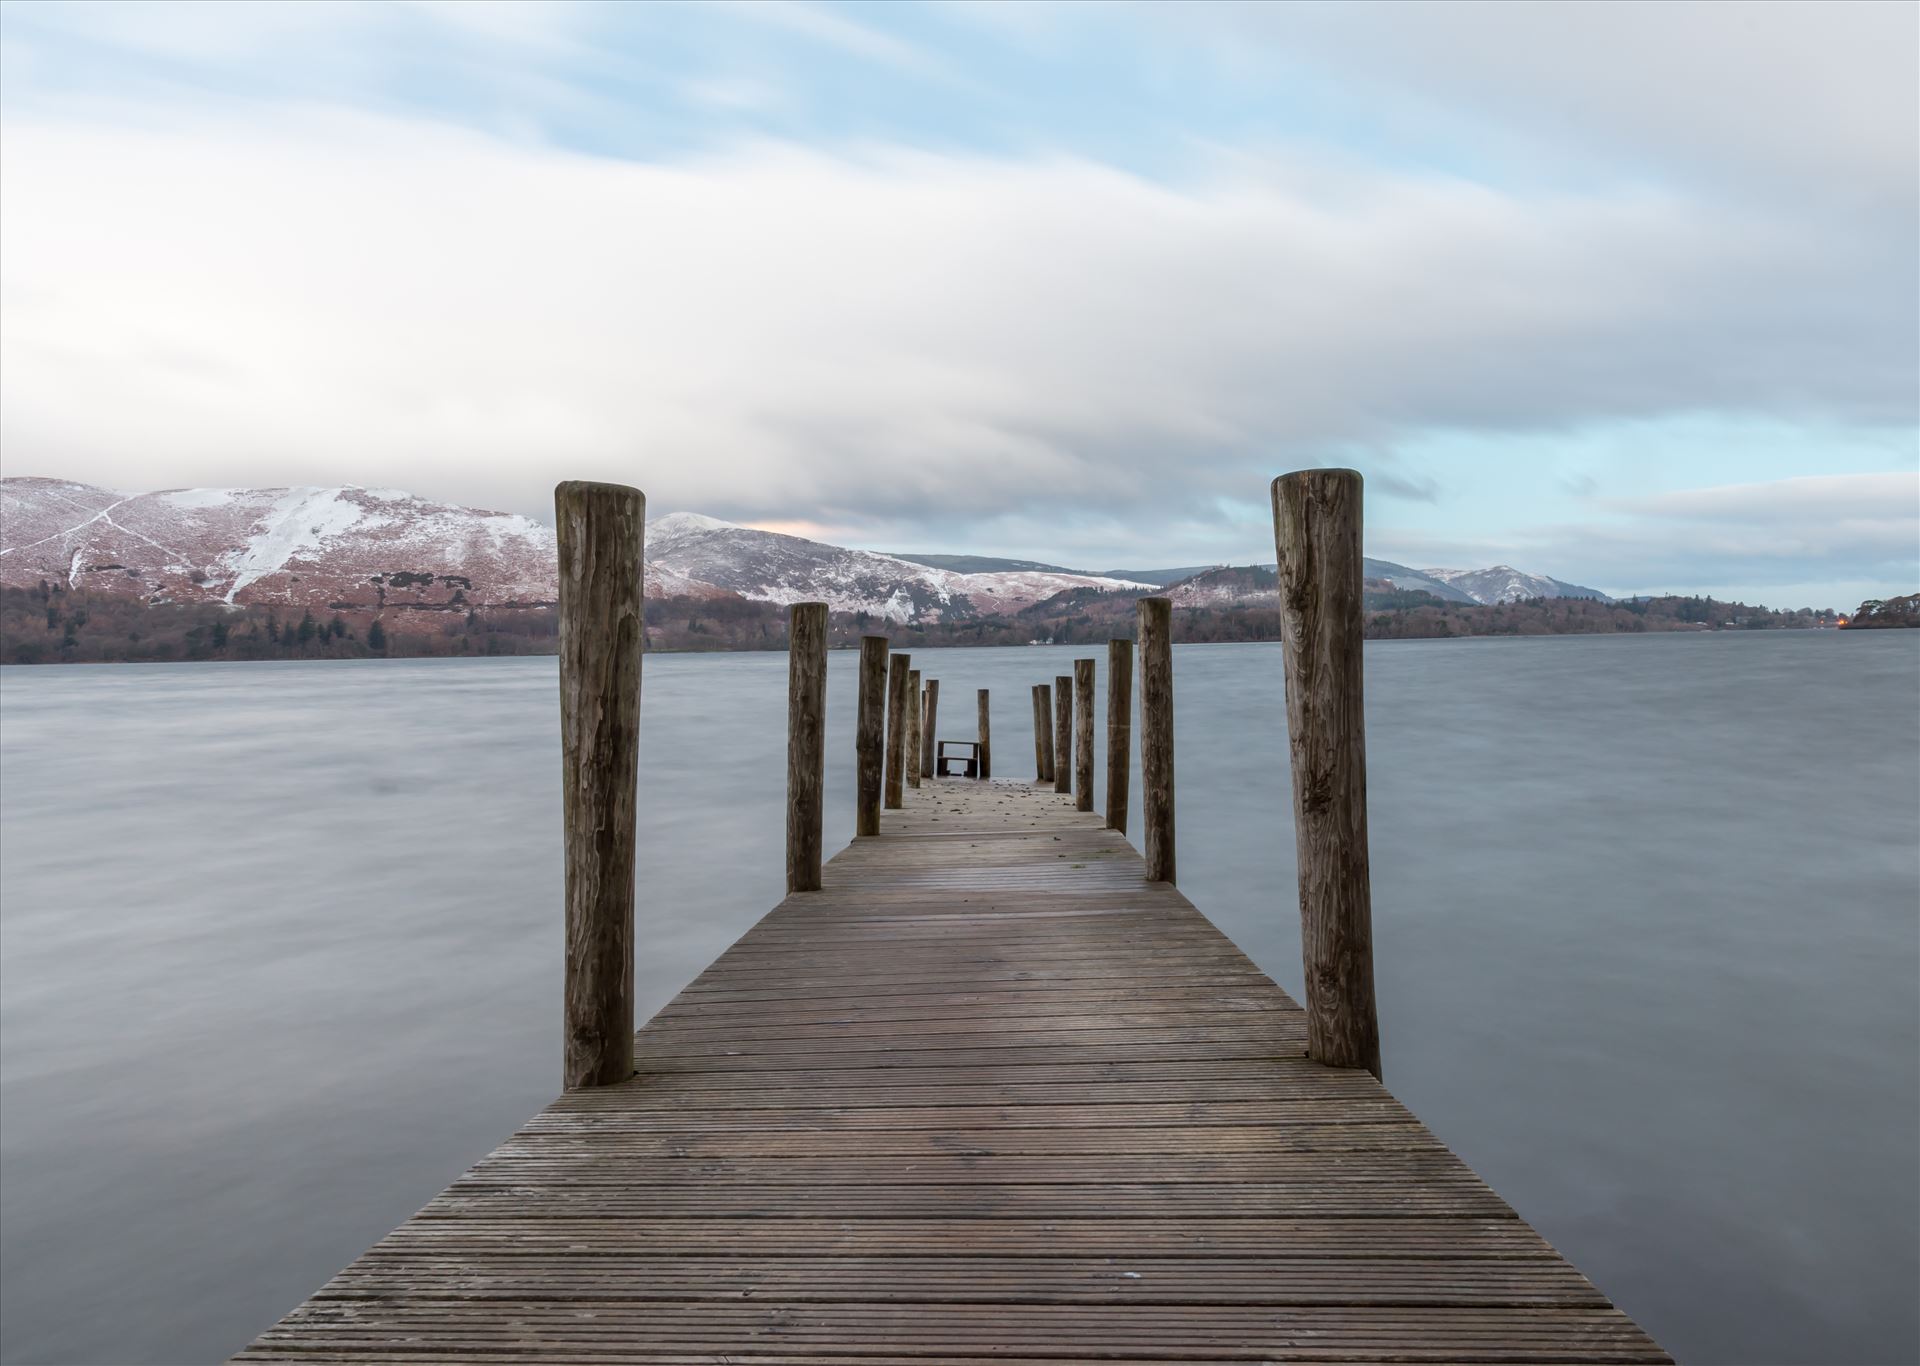 Ashness Jetty, Derwentwater - This beautiful jetty sits on the eastern shore of Lake Derwentwater, nr Keswick by philreay